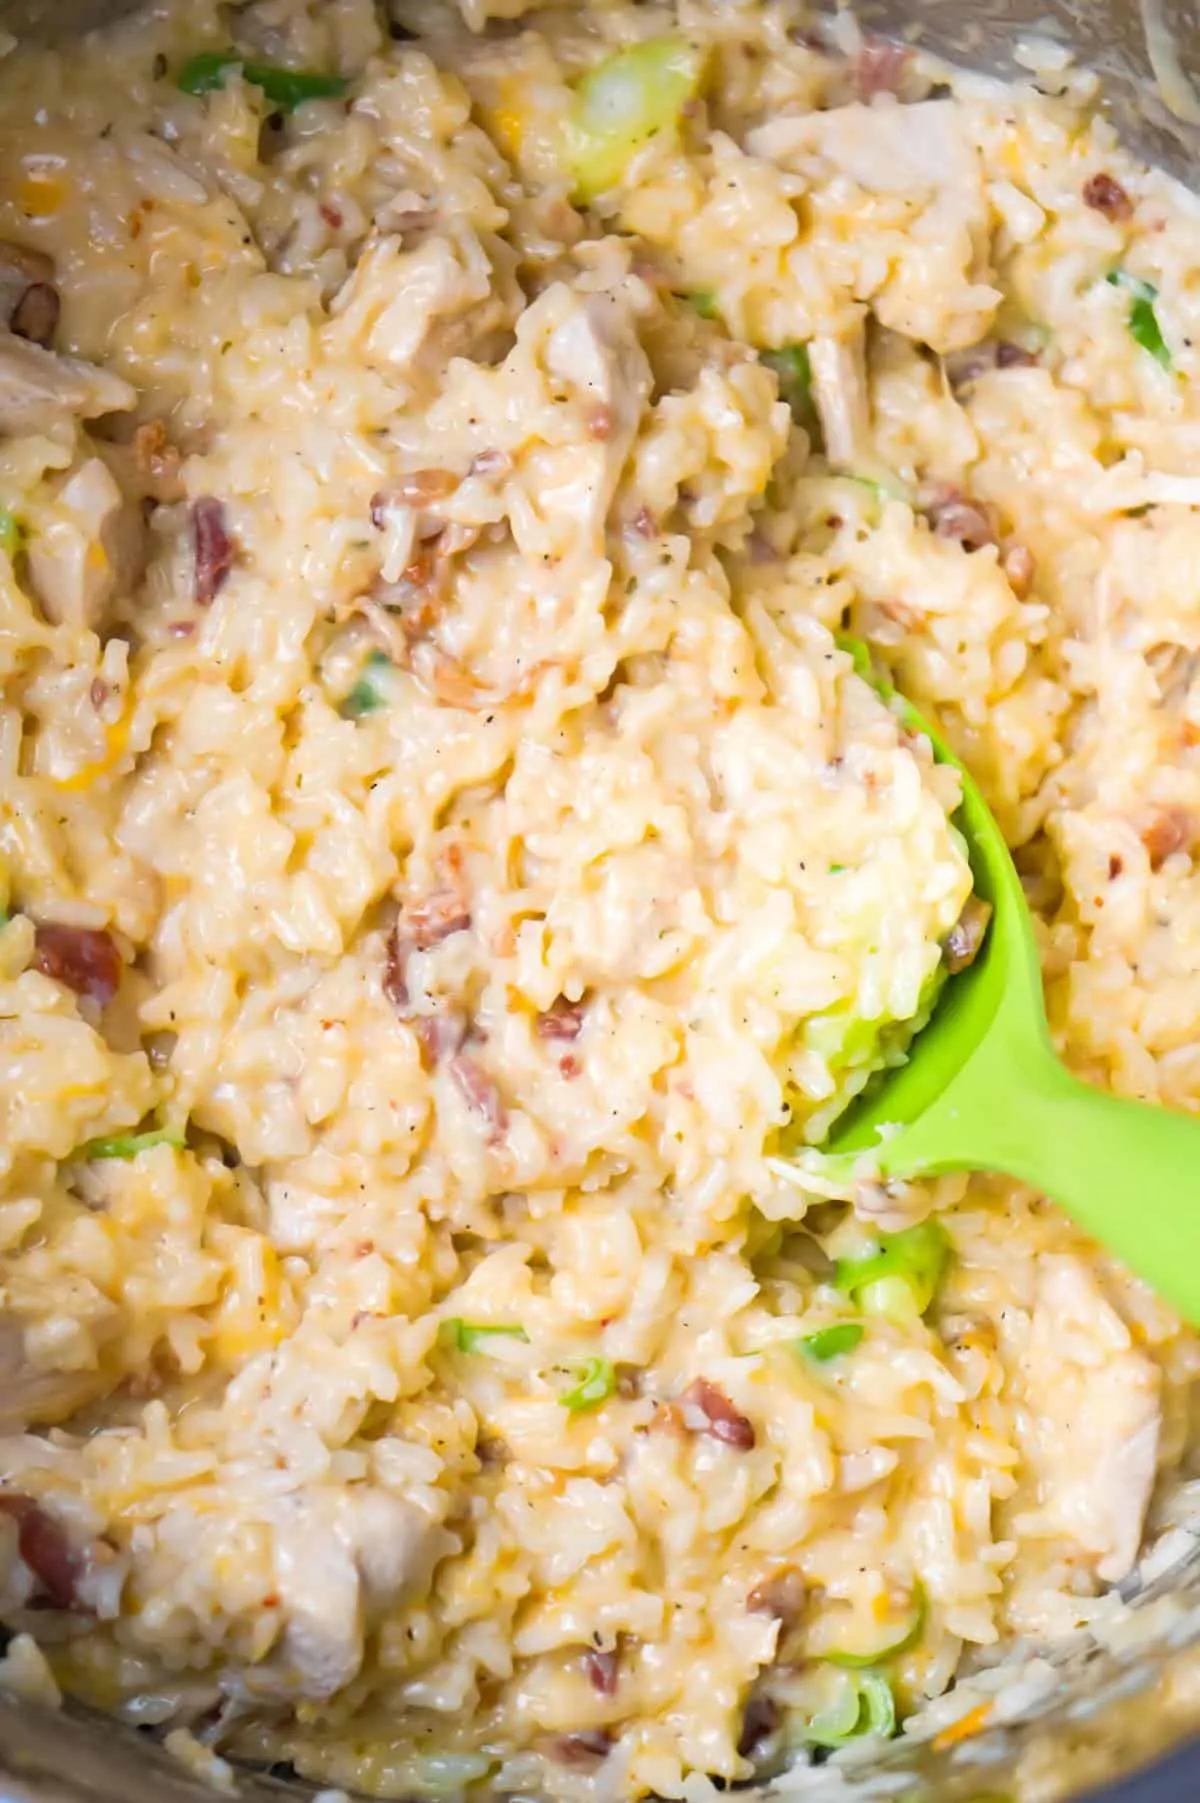 Instant Pot Cheddar Bacon Ranch Chicken and Rice is an easy pressure cooker dinner recipe loaded with chicken breast chunks, crumbled bacon and shredded cheddar cheese.